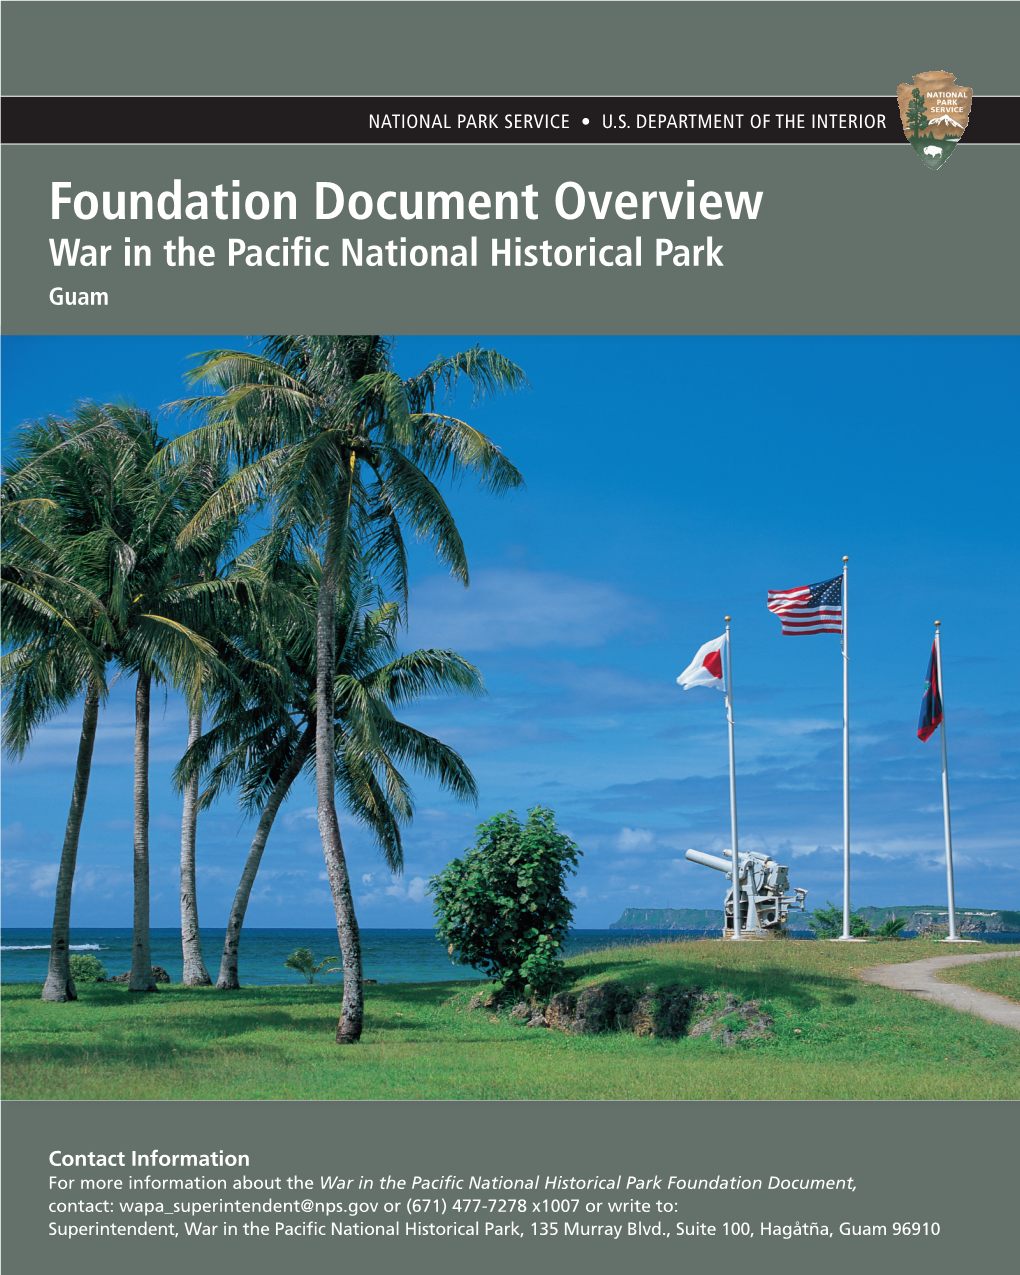 War in the Pacific National Historical Park Foundation Document Overview